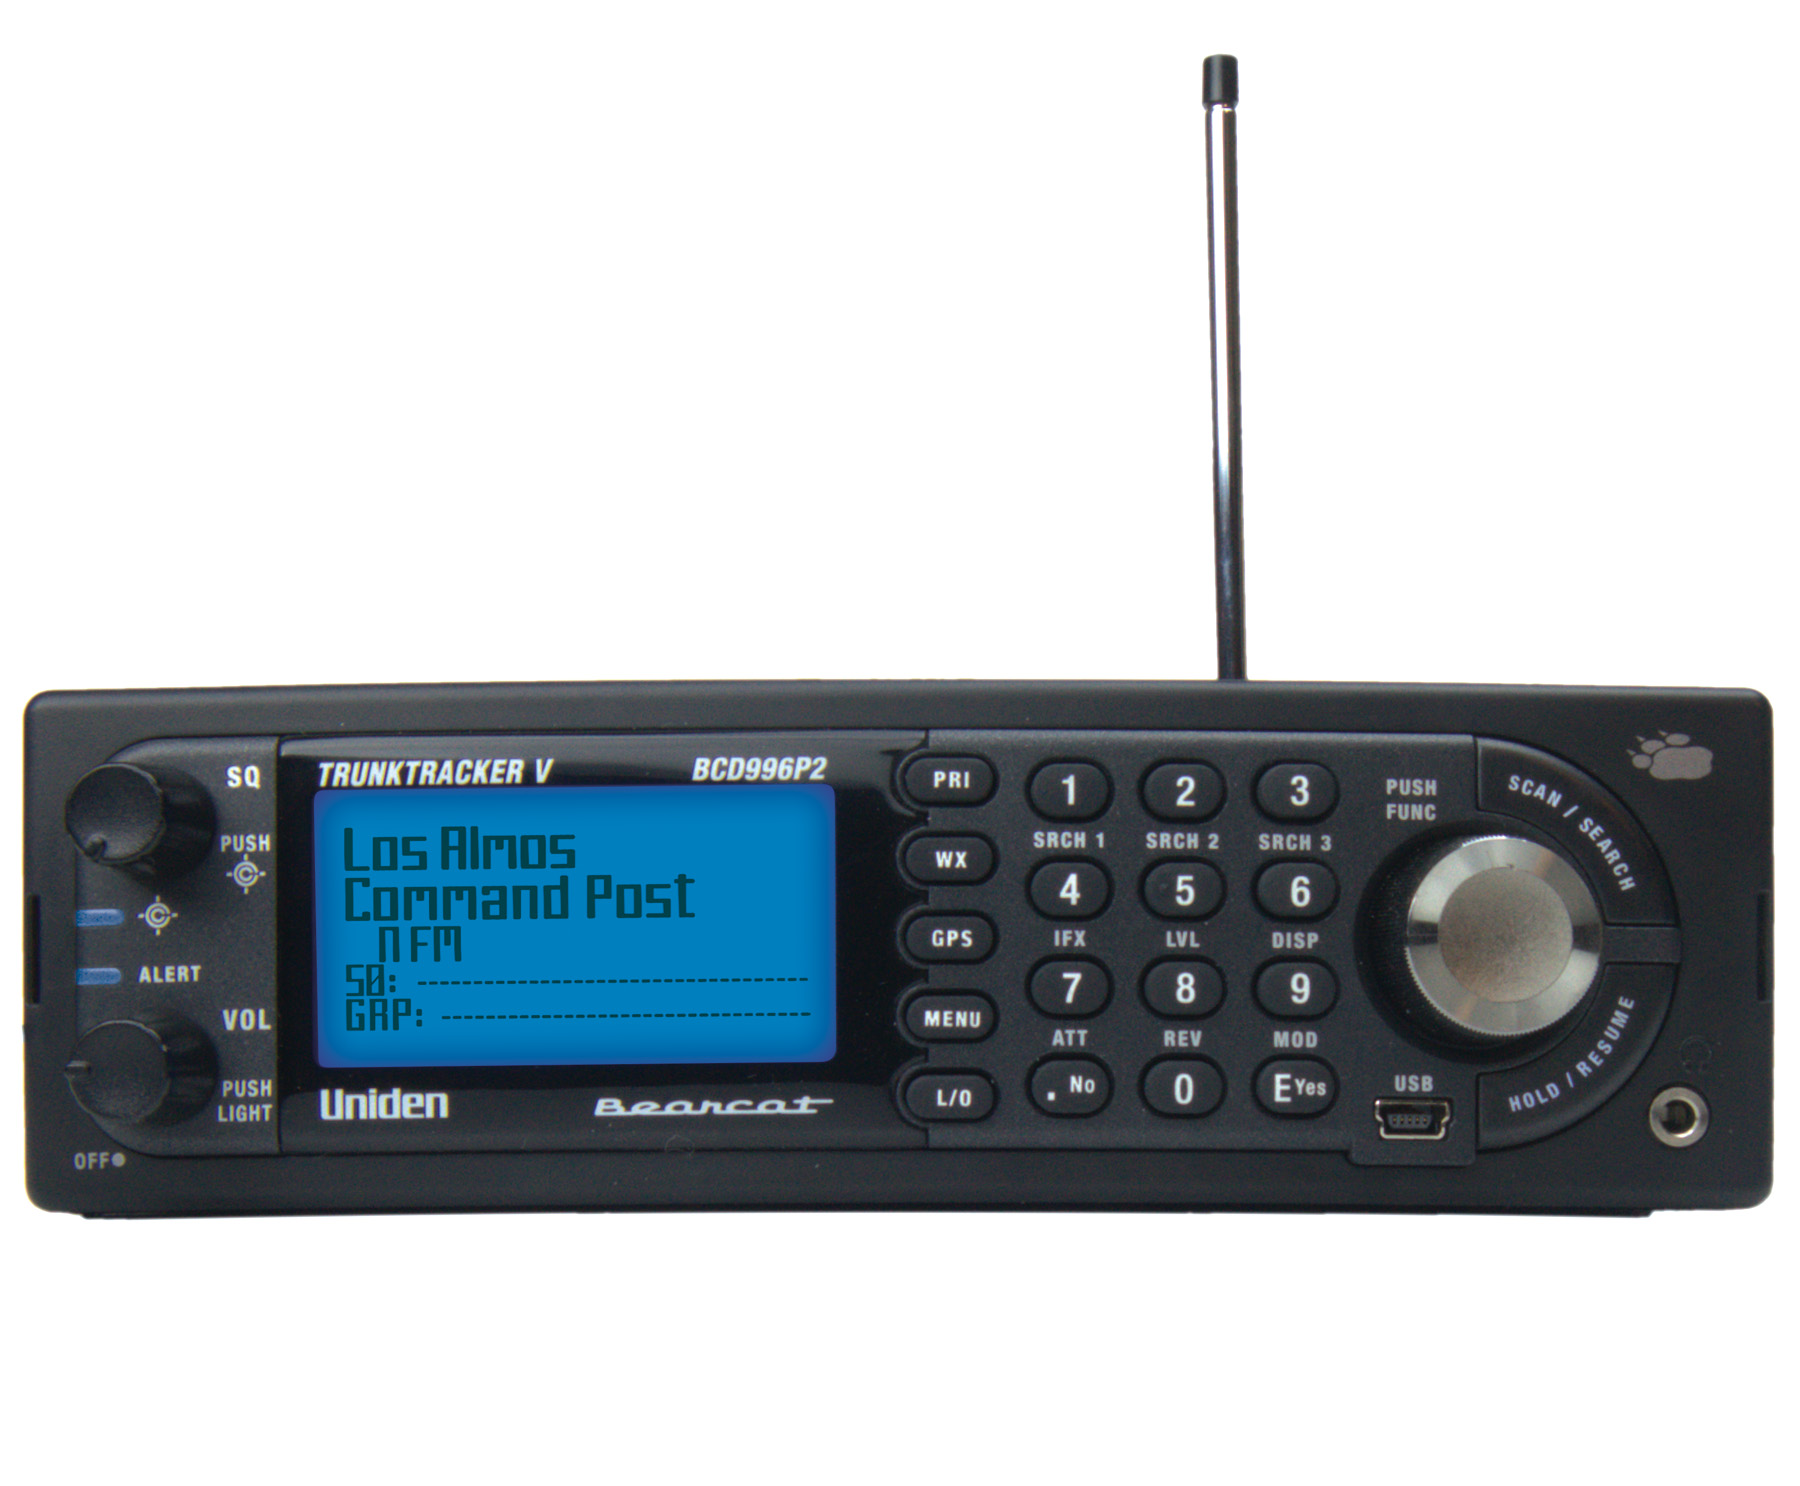 Uniden 25,000 Channel Narrow Band Mobile/Base Scanner With 12 Service Searches, Trunk Tracker V & Gps Capable